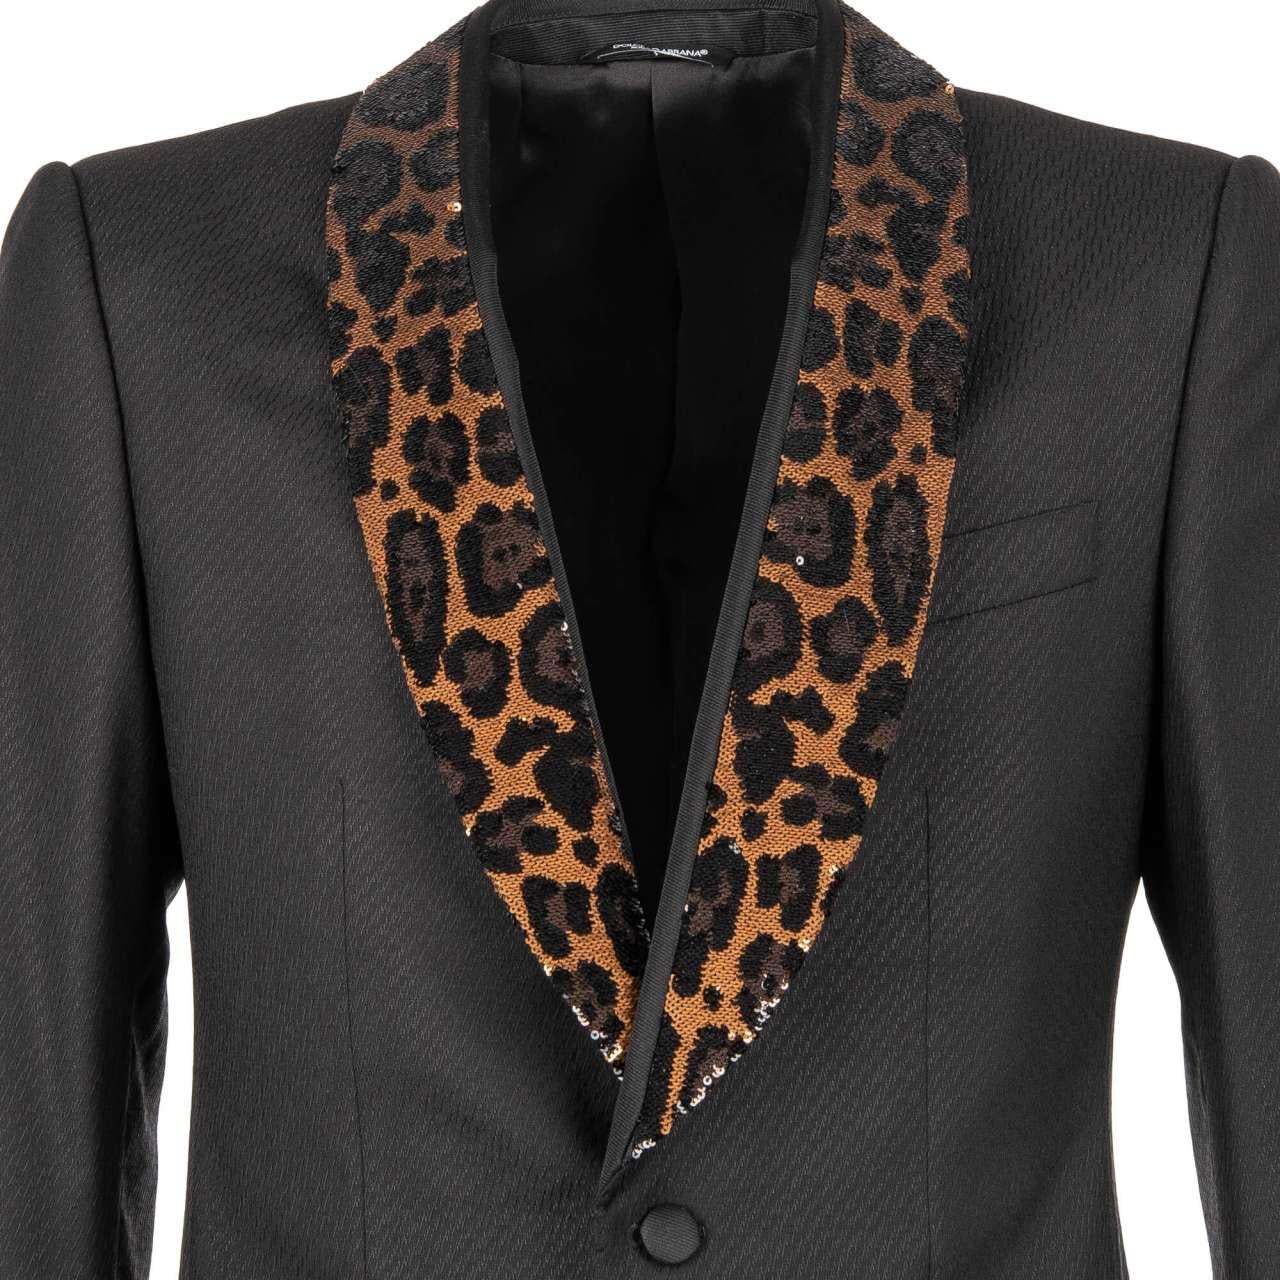 - Virgin Wool Tuxedo / Blazer SICILIA with a sequined contrast leopard shawl lapel by DOLCE & GABBANA - RUNWAY - Dolce&Gabbana Fashion Show - Former RRP: EUR 2.450 - Made In Italy - New with Tag - Slim Fit - Model: G2LK7Z-FM3D8-N0000 - Material: 83%